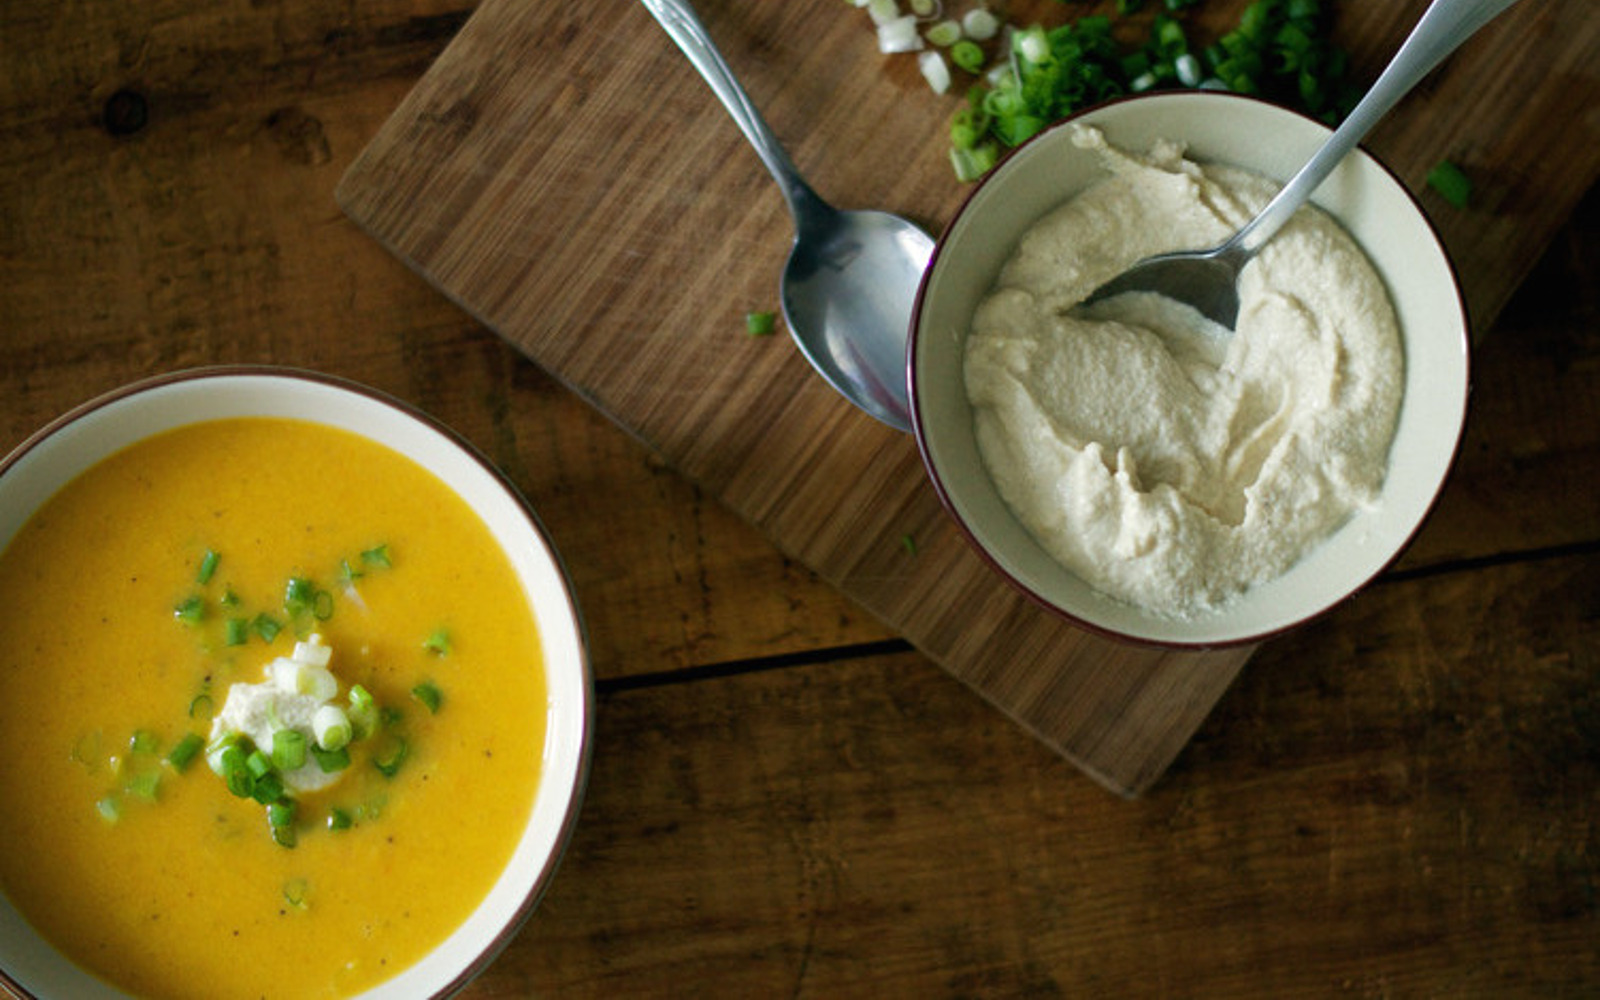 Roasted Garlic-Ginger Carrot Soup With a Miso Cashew Cream